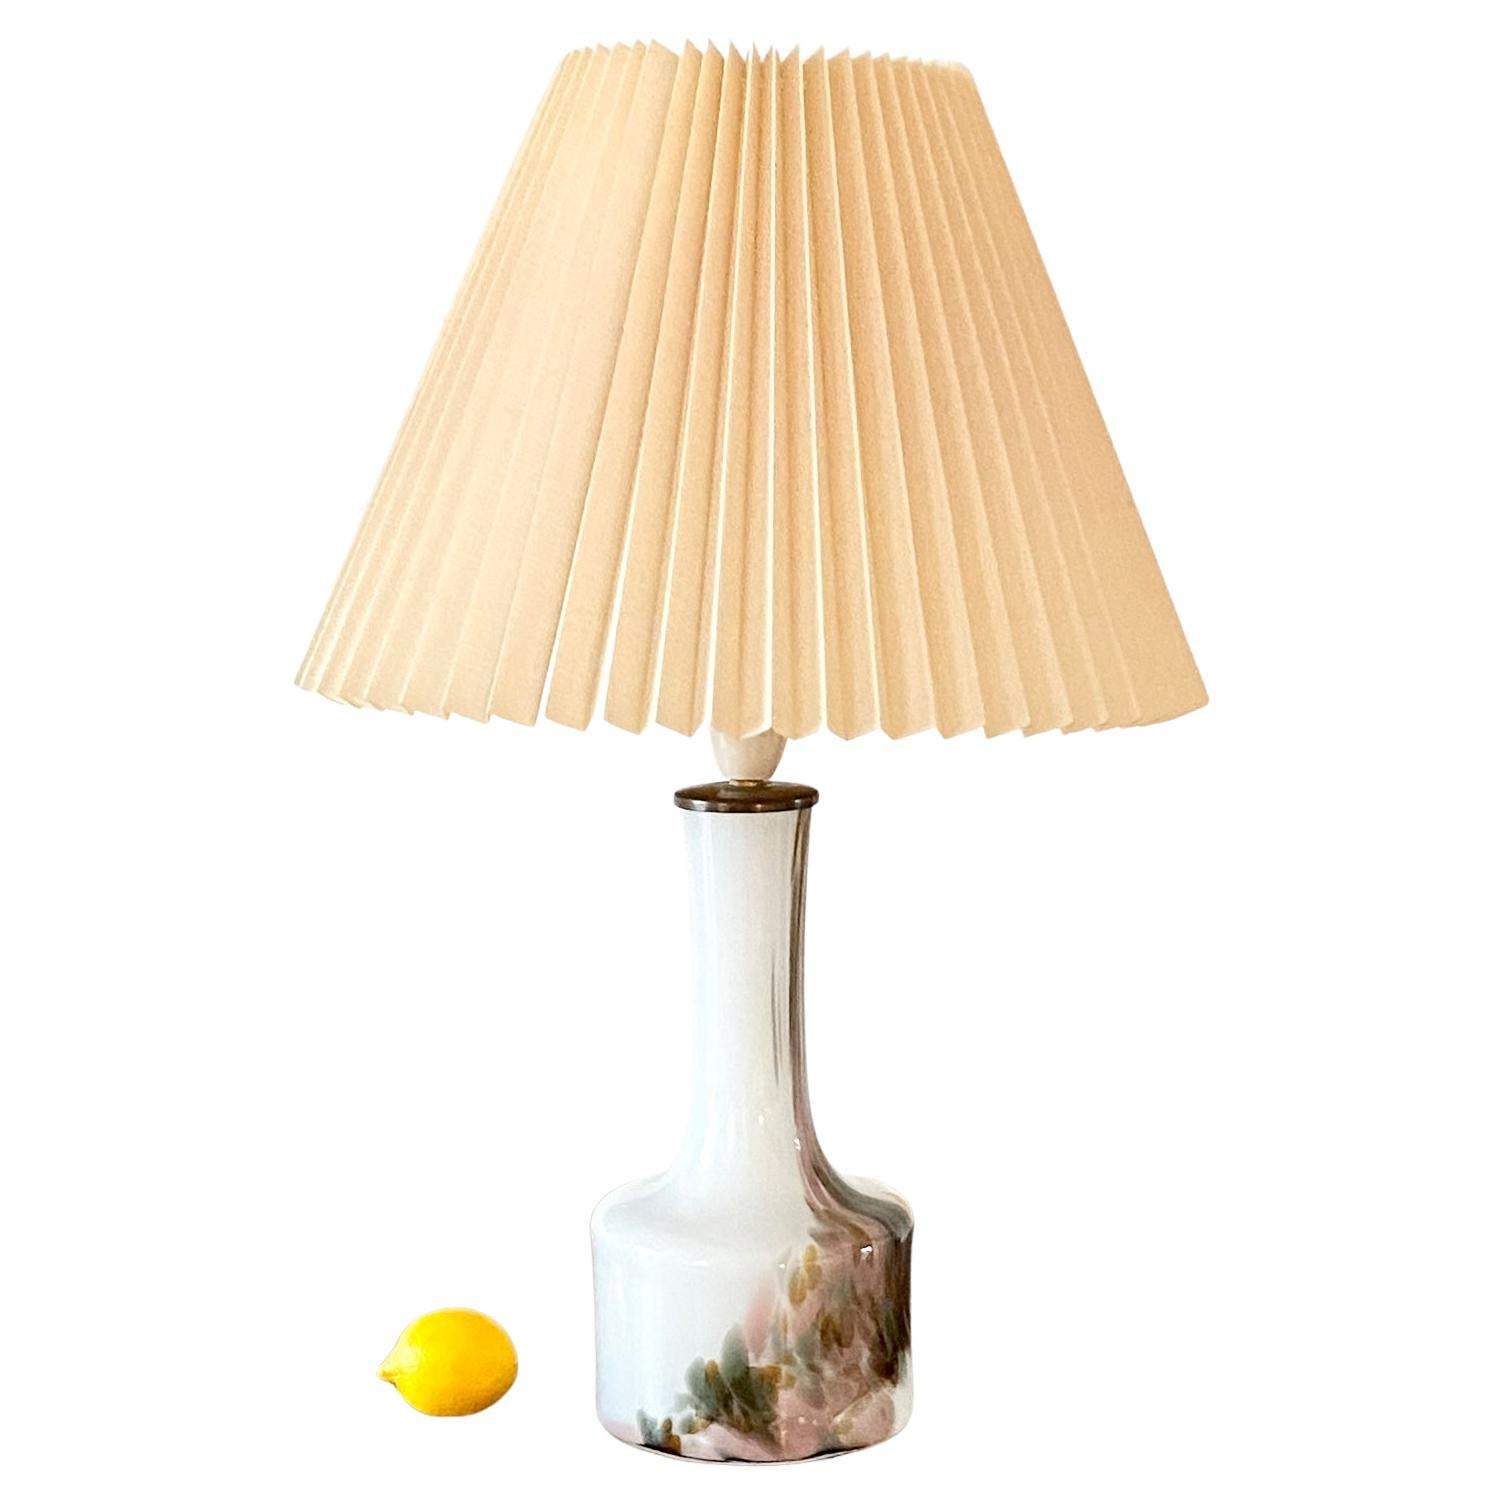 Rare handblown Art glass holmegaard table lamp by Per Lütken

Holmegaards Cascade table lamps was designed around 1970 by Per Lütken (1916-1998) and are considered very rare due to limited production.
They are made in opaline glass with colored